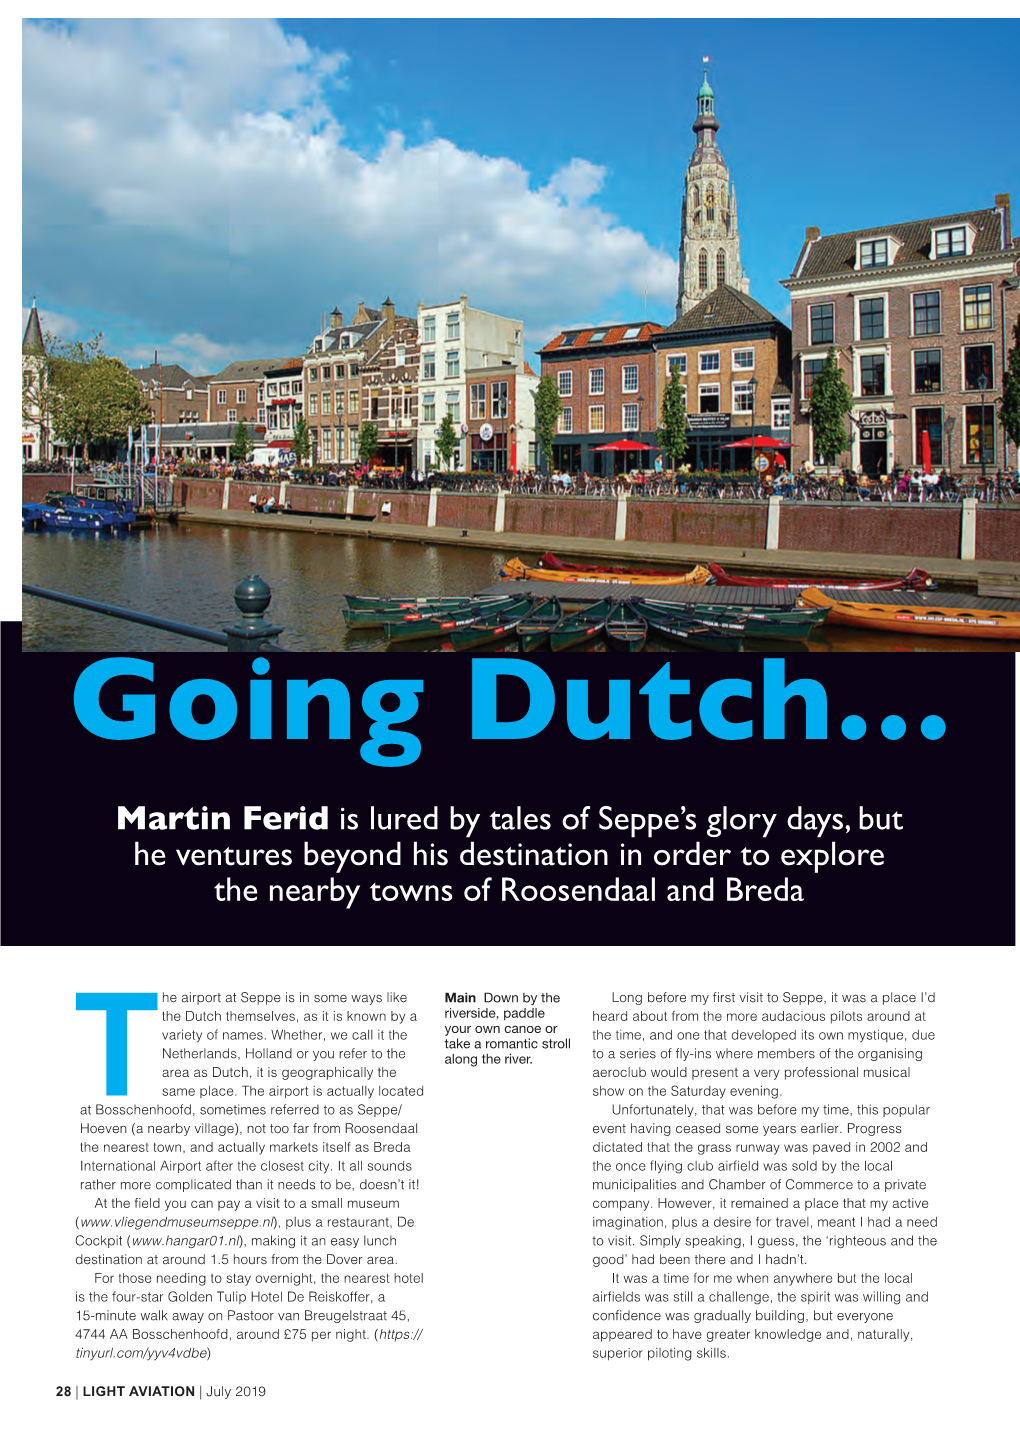 Martin Ferid Is Lured by Tales of Seppe’S Glory Days, but He Ventures Beyond His Destination in Order to Explore the Nearby Towns of Roosendaal and Breda